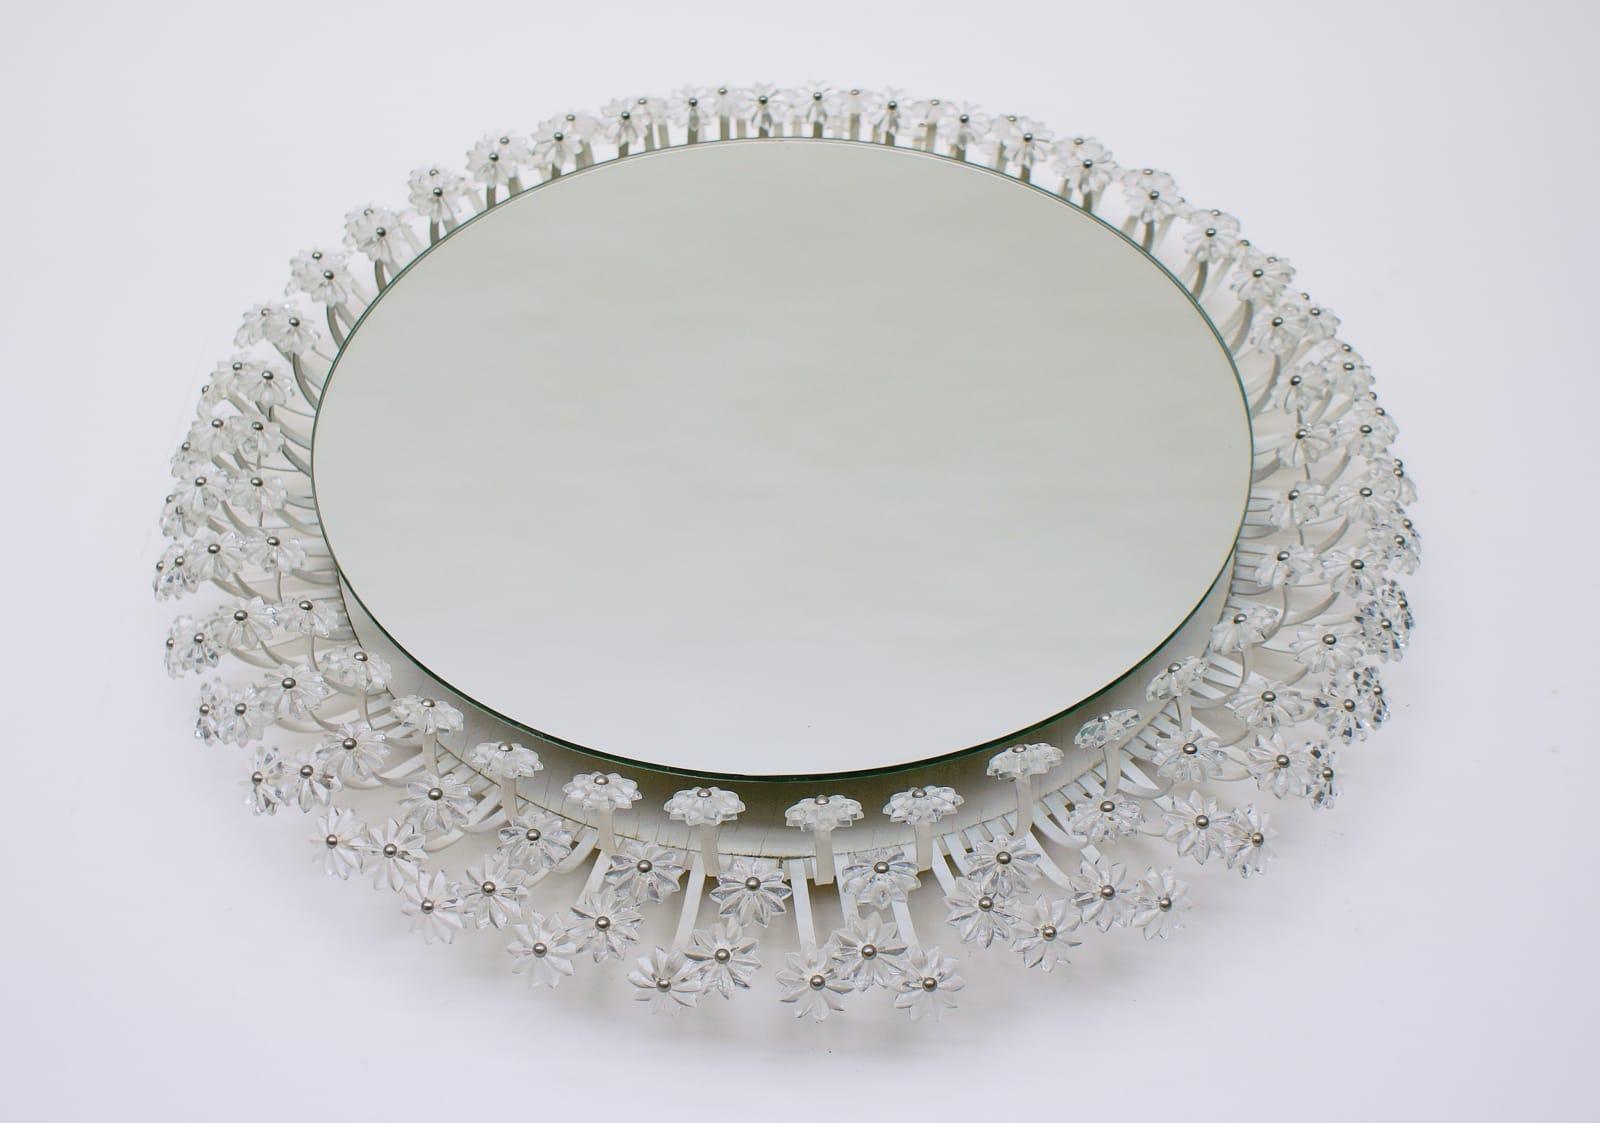 A beautiful large round flower wall mirror with illuminated background and hundreds of Lucite blossoms by Emil Stejnar for Rupert Nikoll, Austria. Fine working condition. Measures: Width 60 cm / 23.6 inches, 10 cm / 3.94 inches deep. This backlit